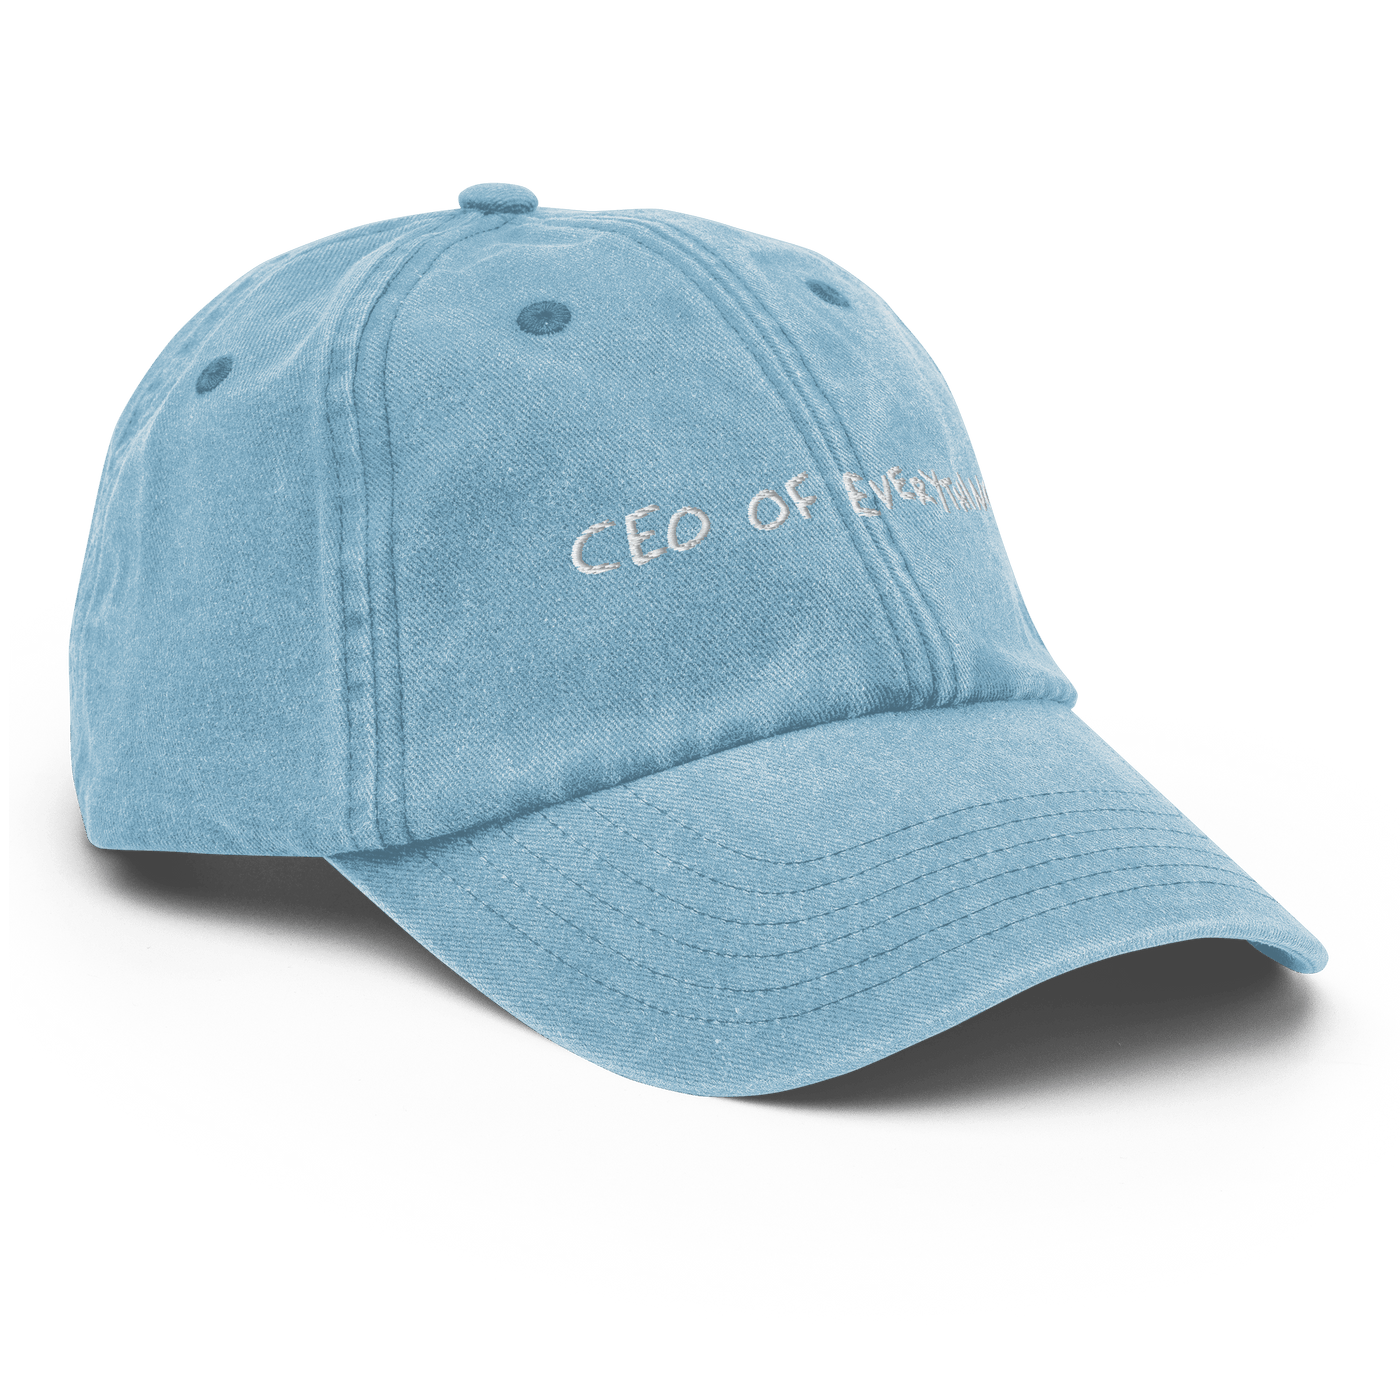 CEO of everything Vintage Hat - Vintage Light Denim - - Just Another Cap Store